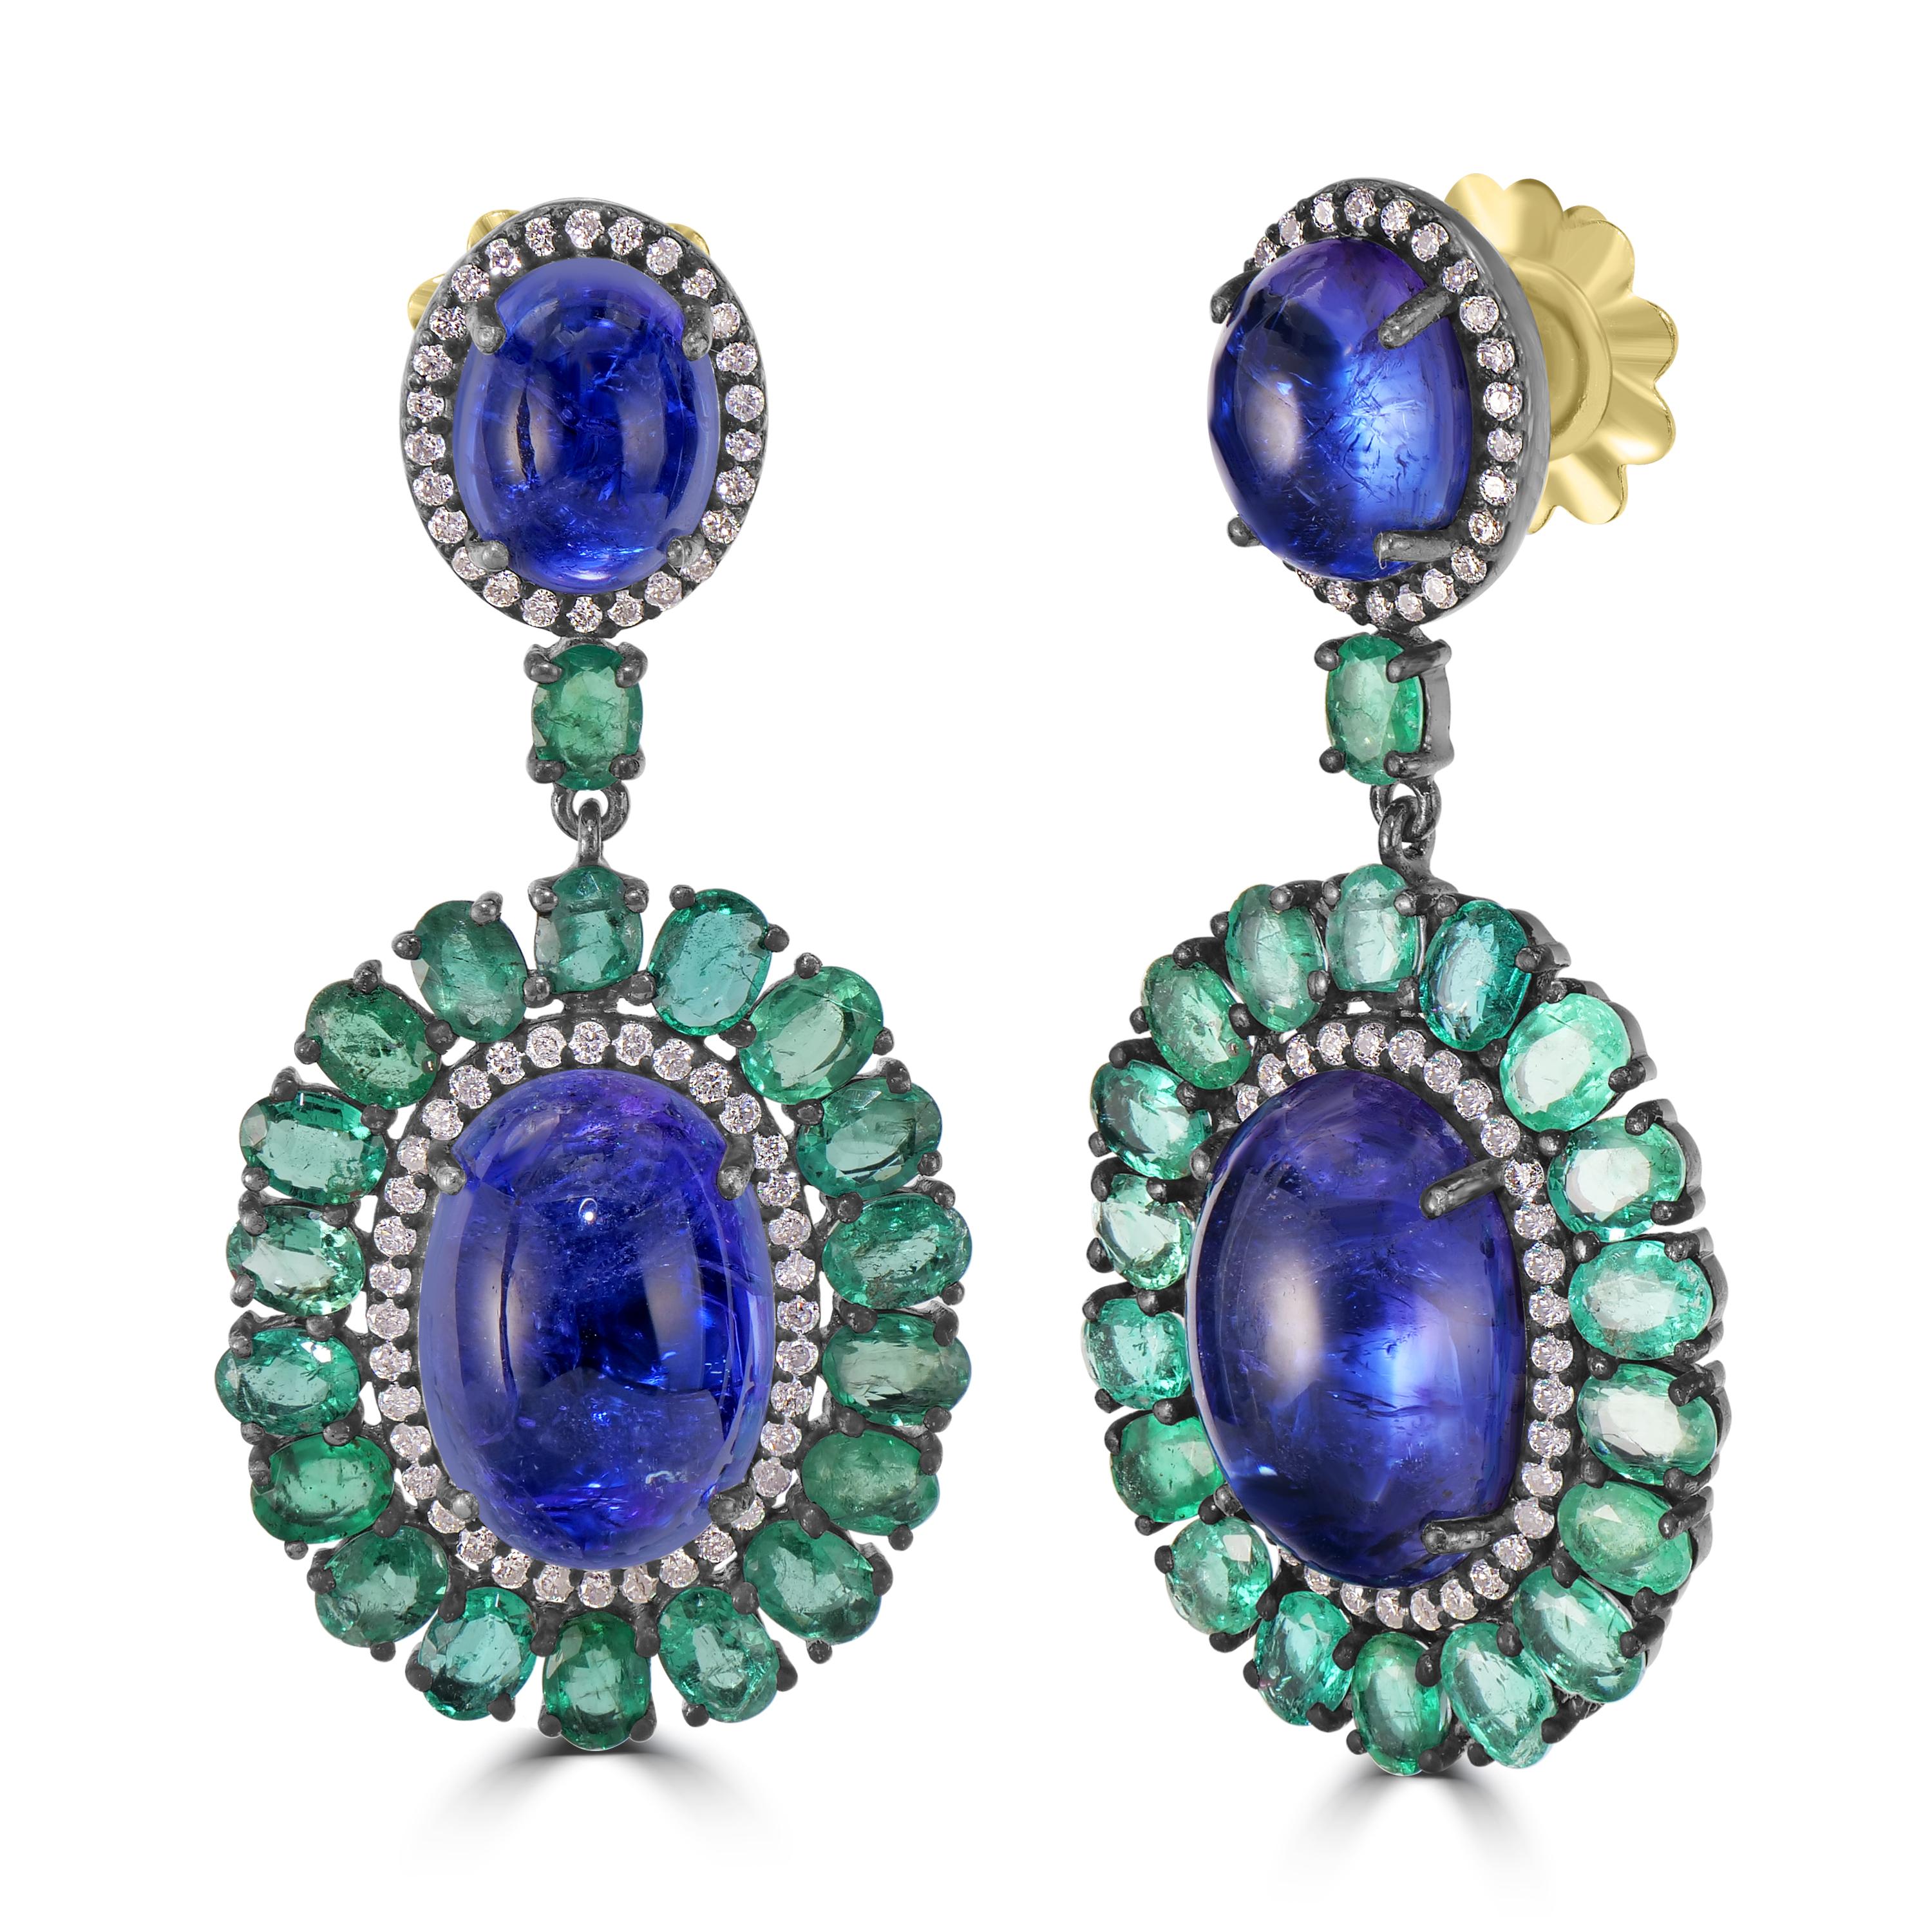 Introducing our Victorian 27.85 Cttw. Tanzanite, Diamond, and Emerald Dangle Earrings—a botanical masterpiece that captures the essence of nature's elegance and the allure of precious gemstones.

At the core of these enchanting earrings is an oval